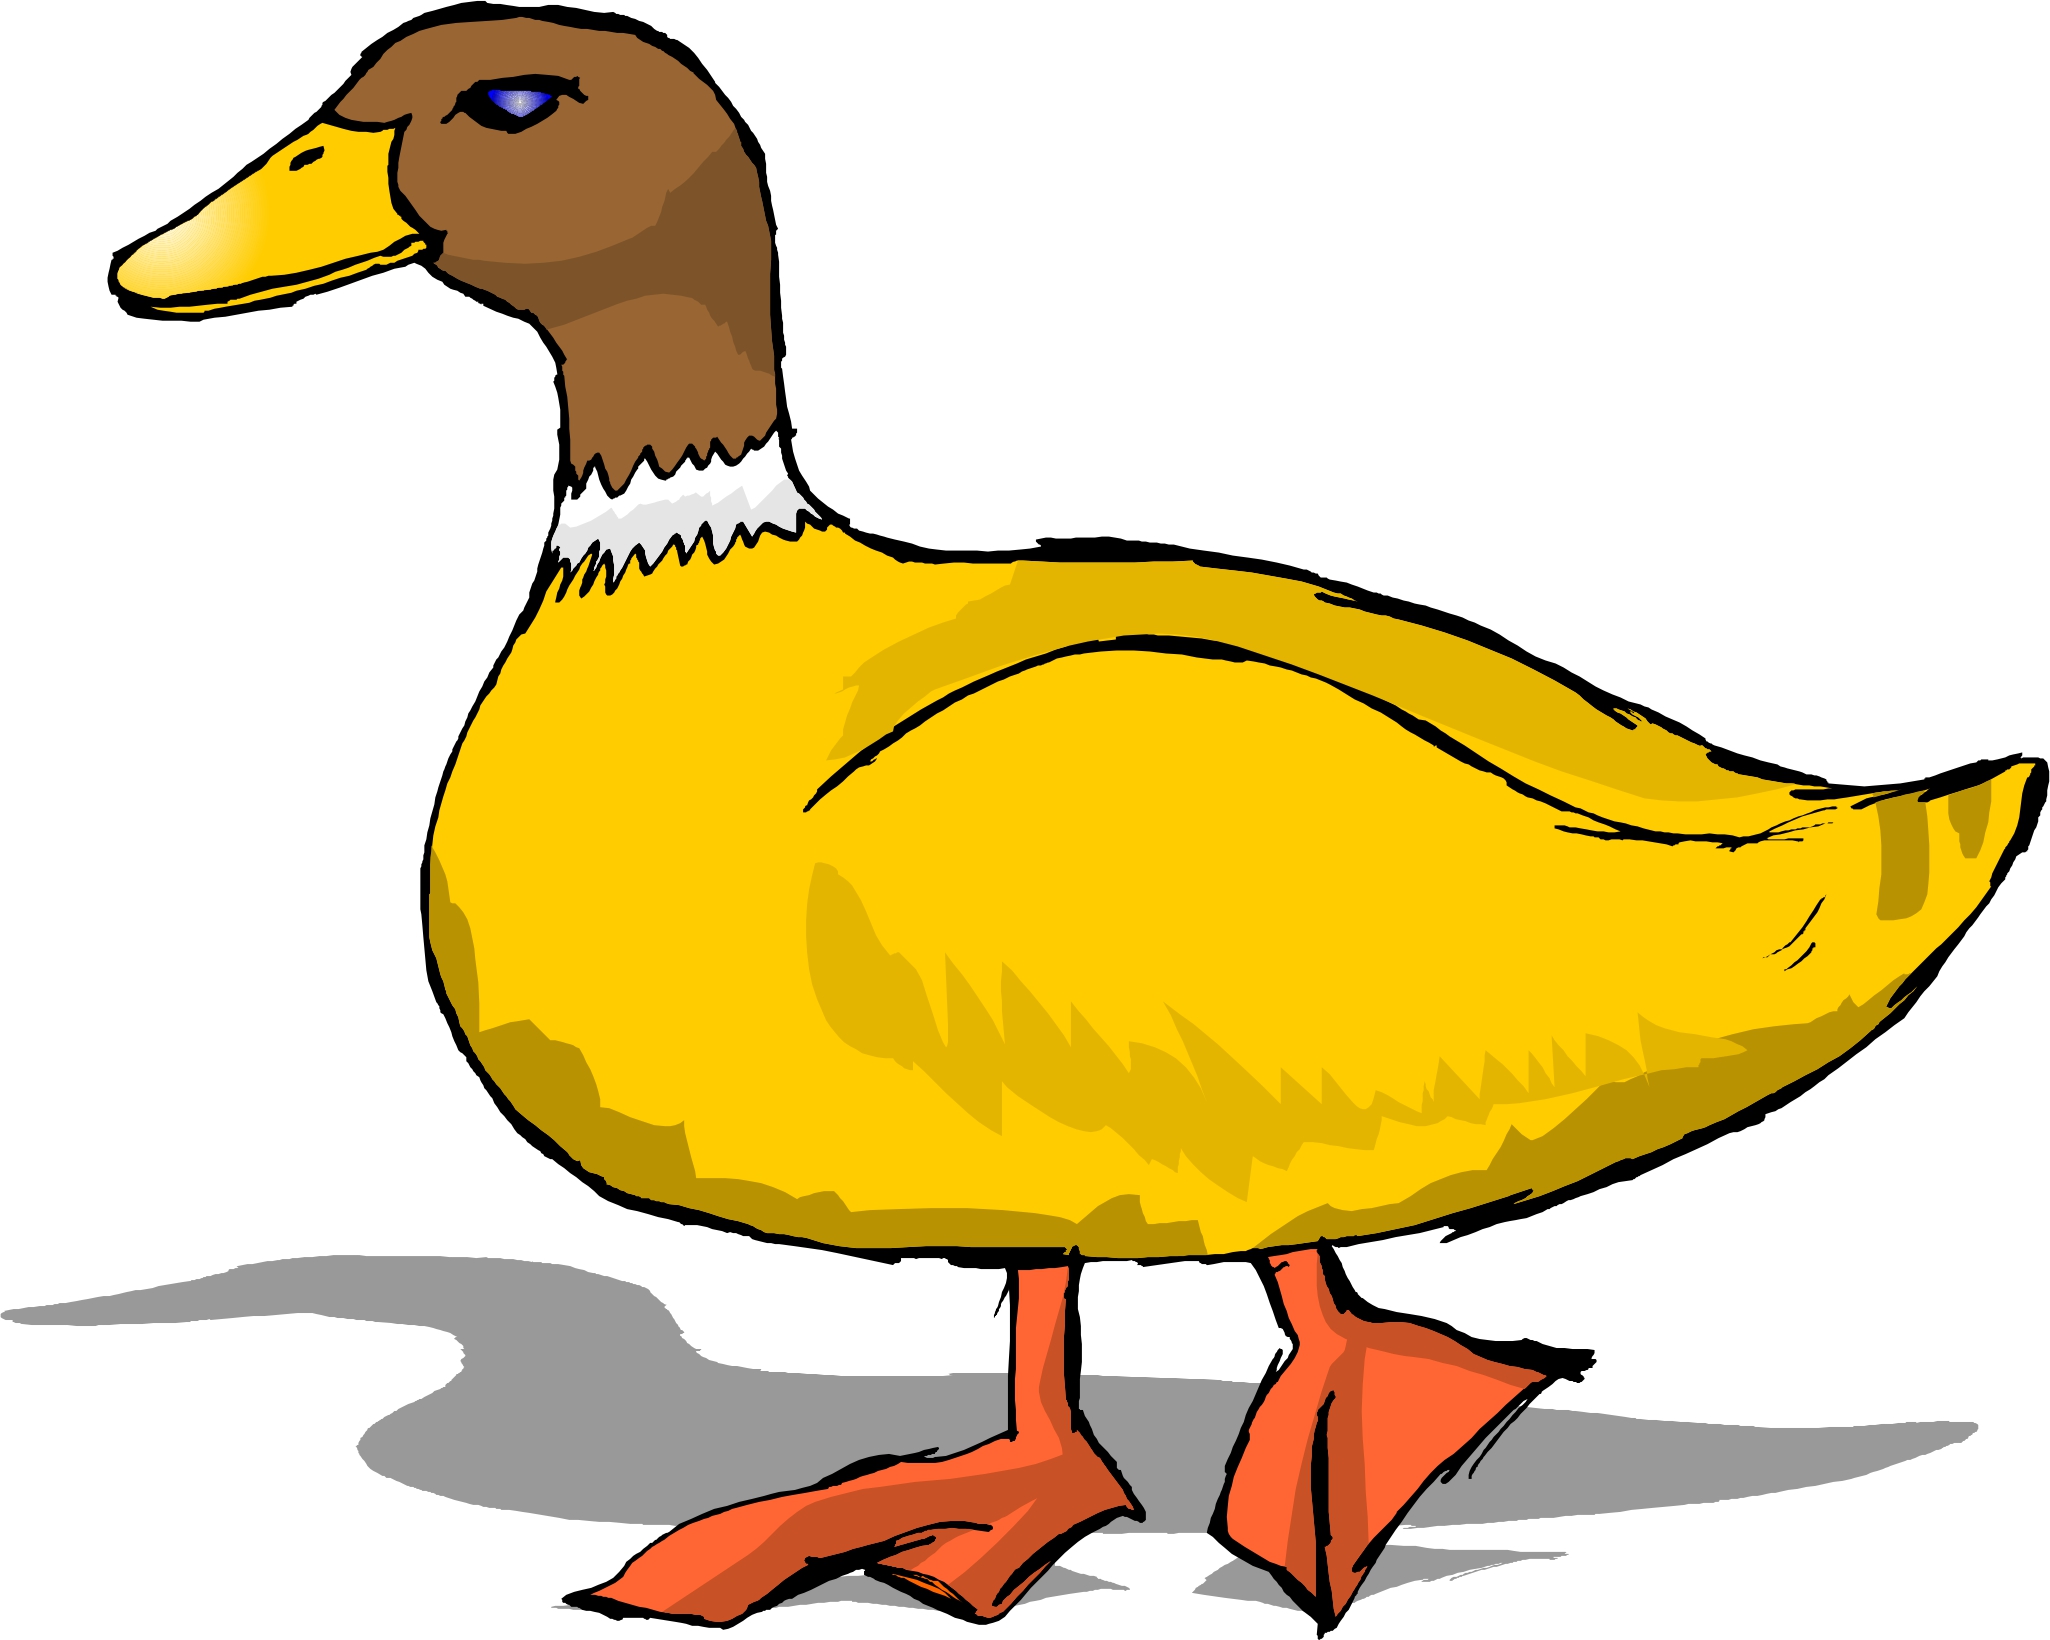 Gambar Pictures Animated Ducks Free Download Clip Art Duck Images ...